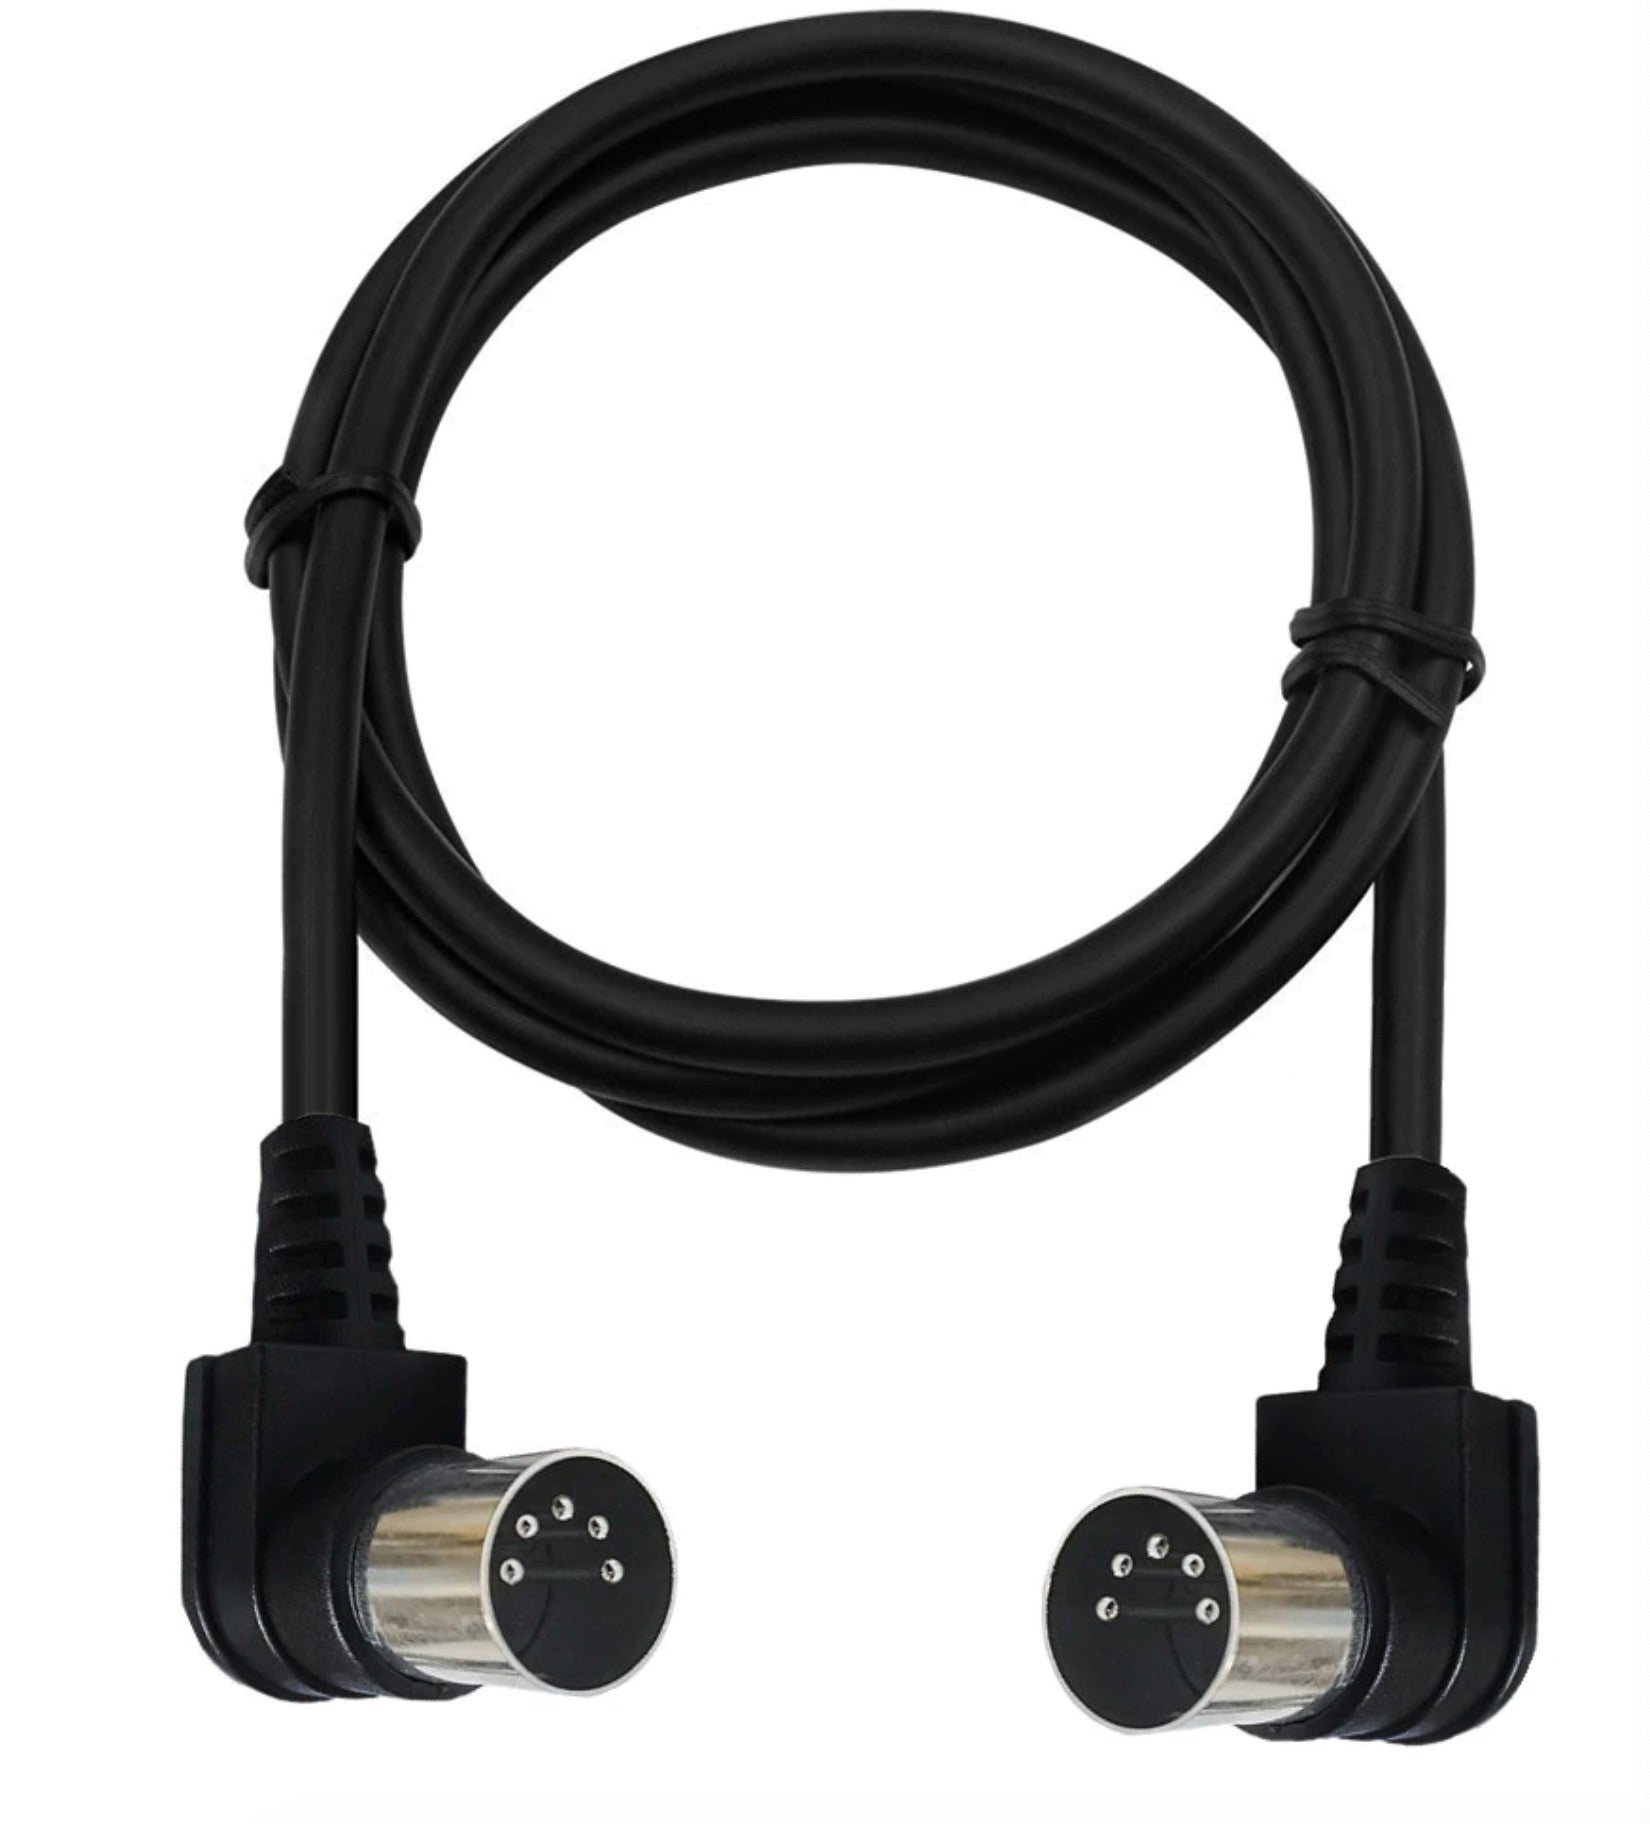 5-Pin Din MIDI Cable Angled Male to Male For MIDI Keyboard